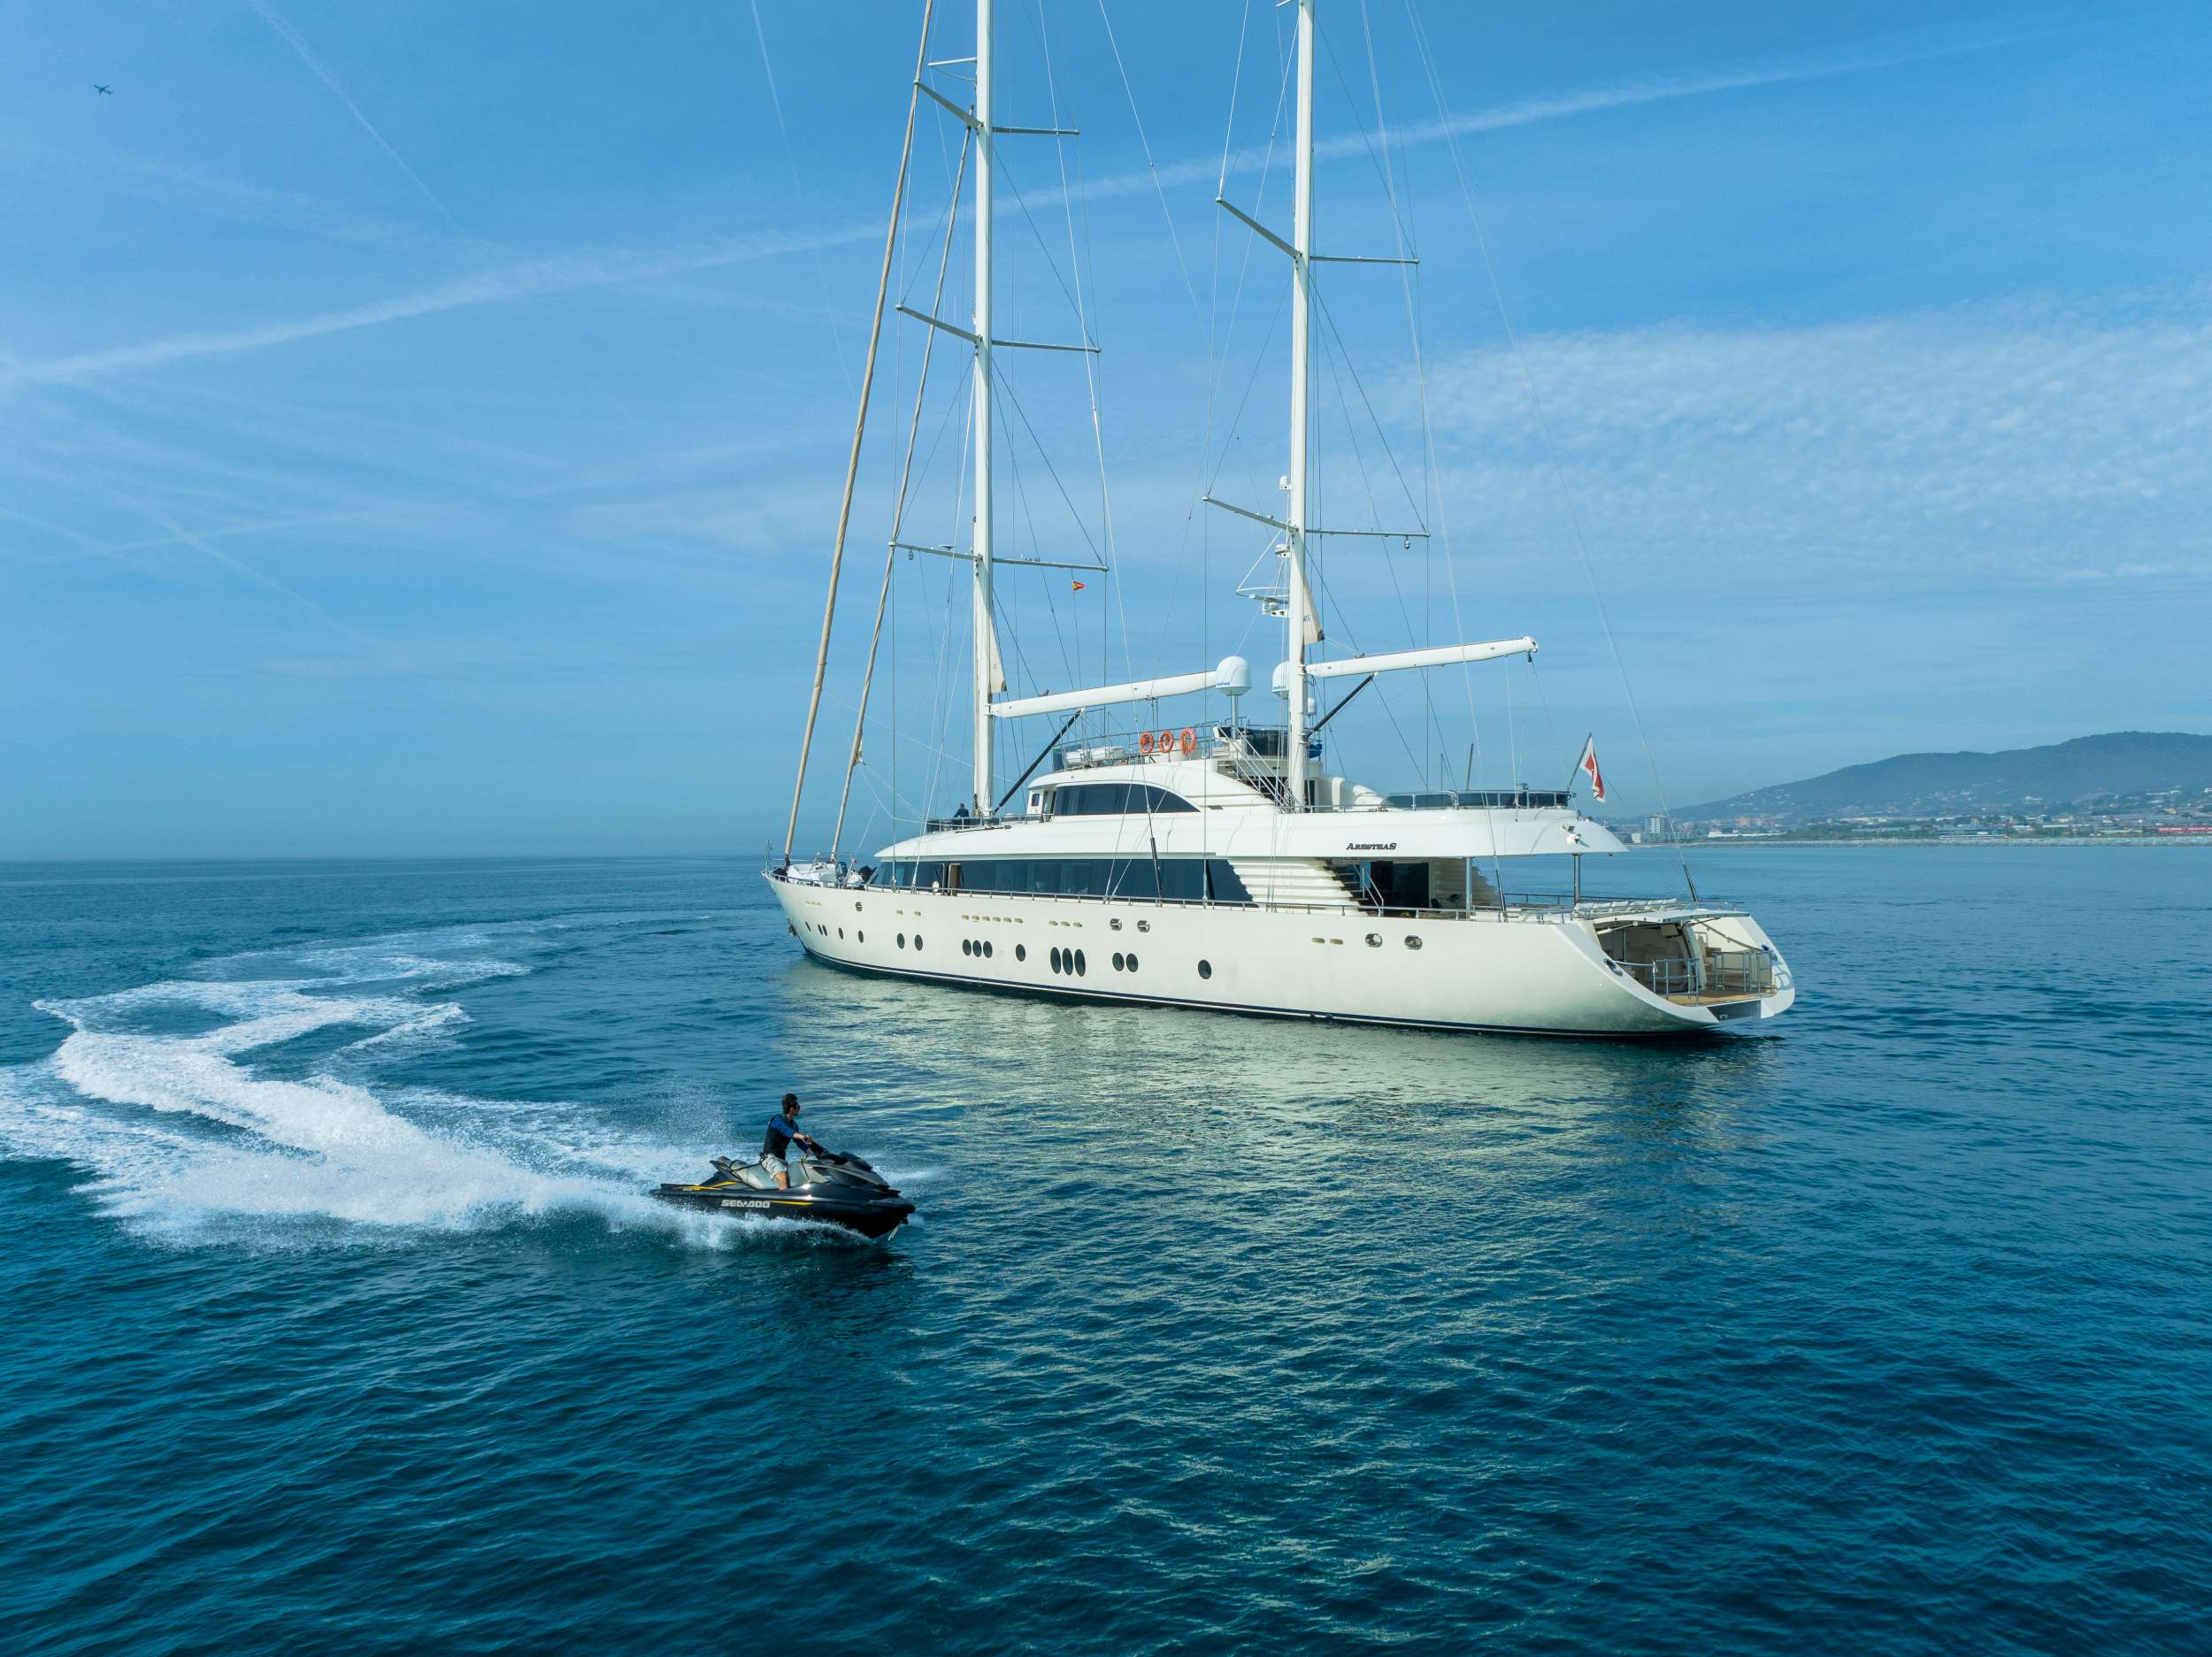 ARESTEAS - Yacht Charter Cyprus & Boat hire in W. Med -Naples/Sicily, W. Med -Riviera/Cors/Sard., W. Med - Spain/Balearics 1